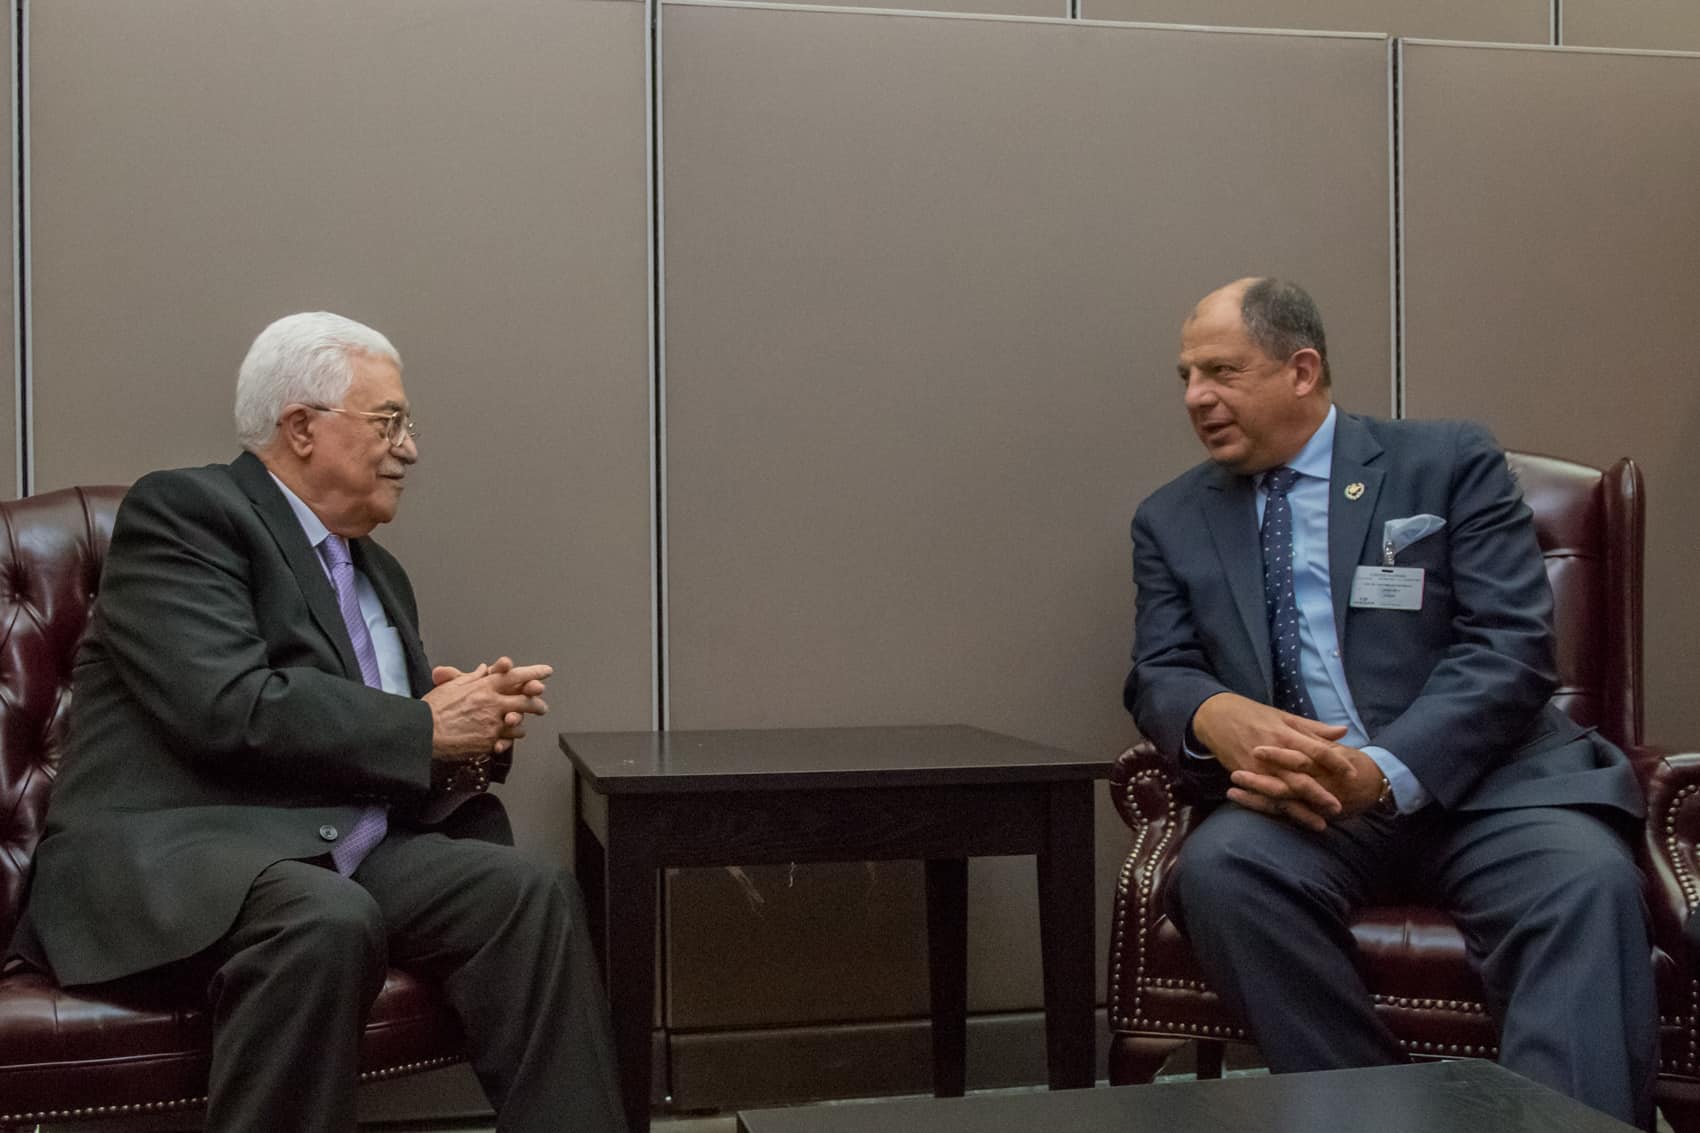 President Solís meets with Palestinian Authority President Mahmoud Abbas at UN